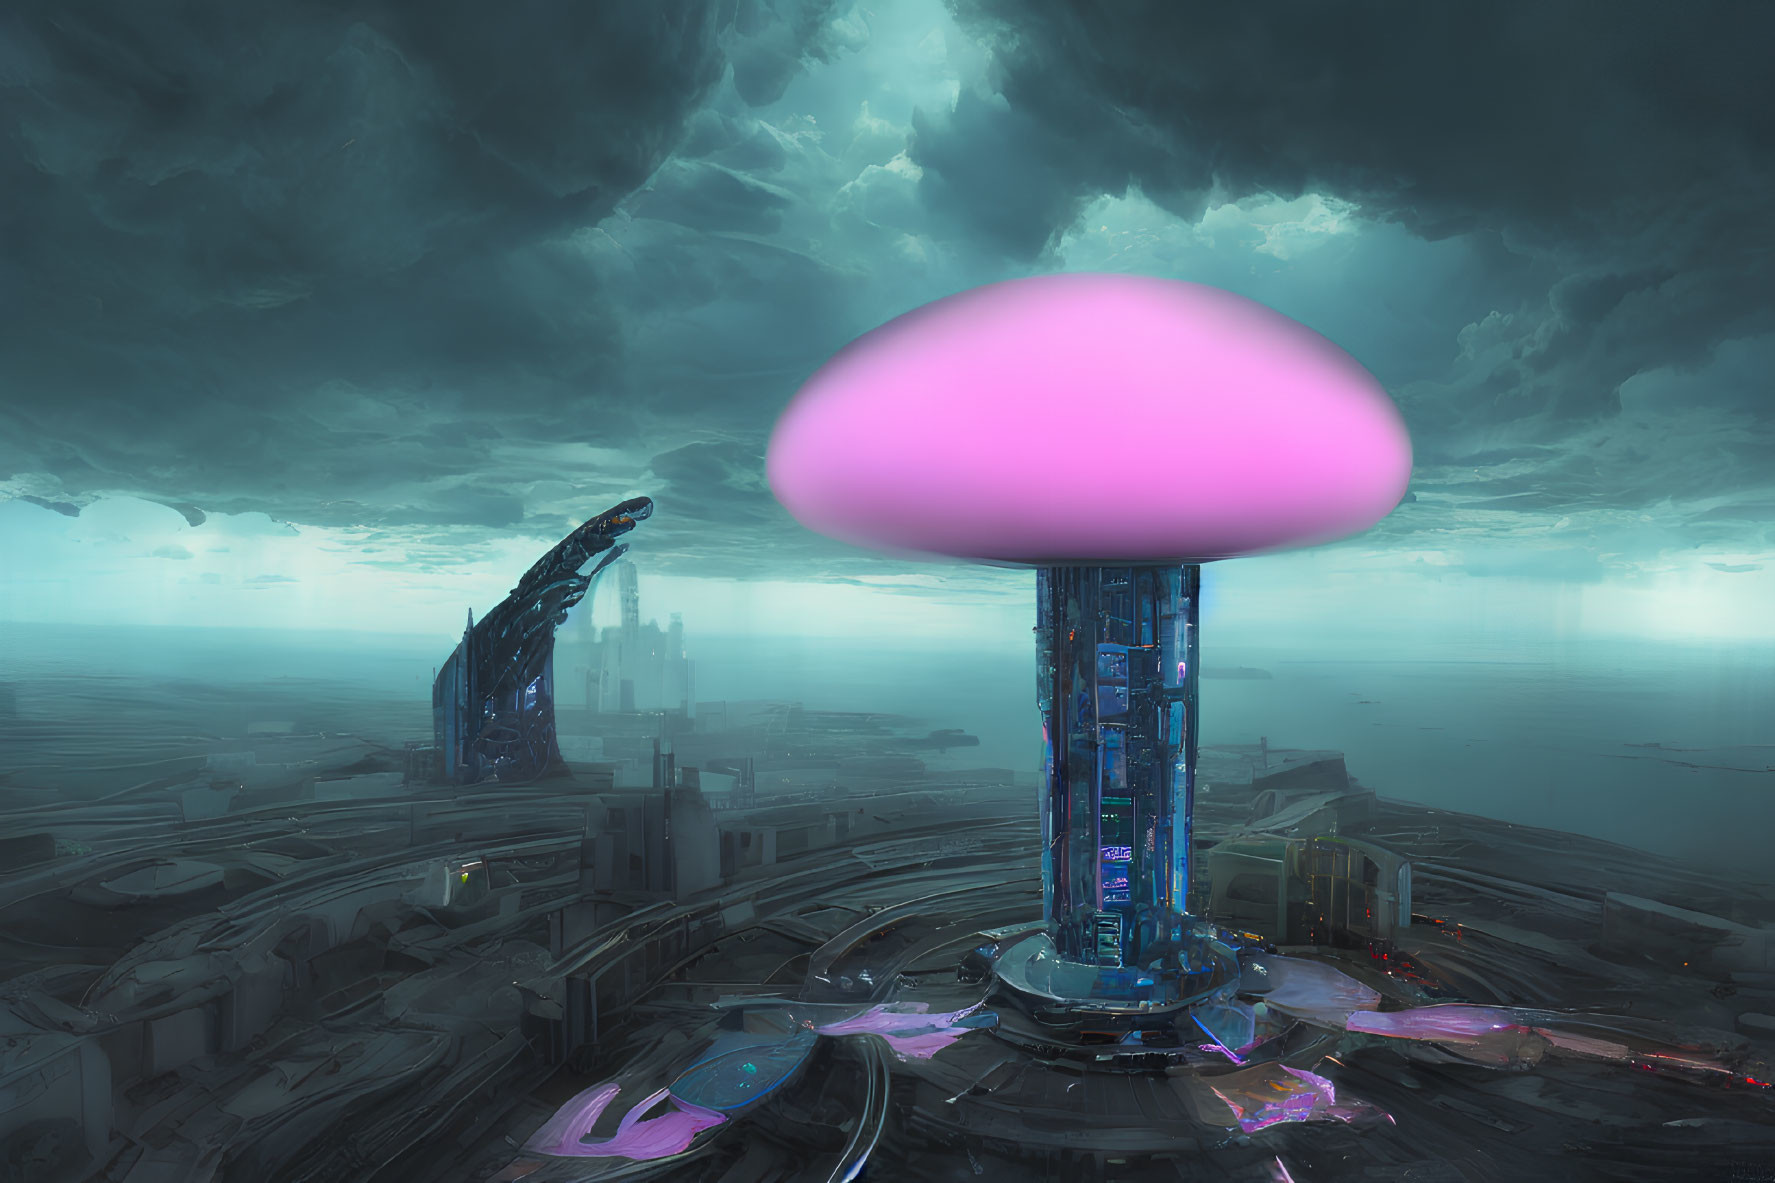 Futuristic cityscape with glowing mushroom structure and neon-lit skyscrapers